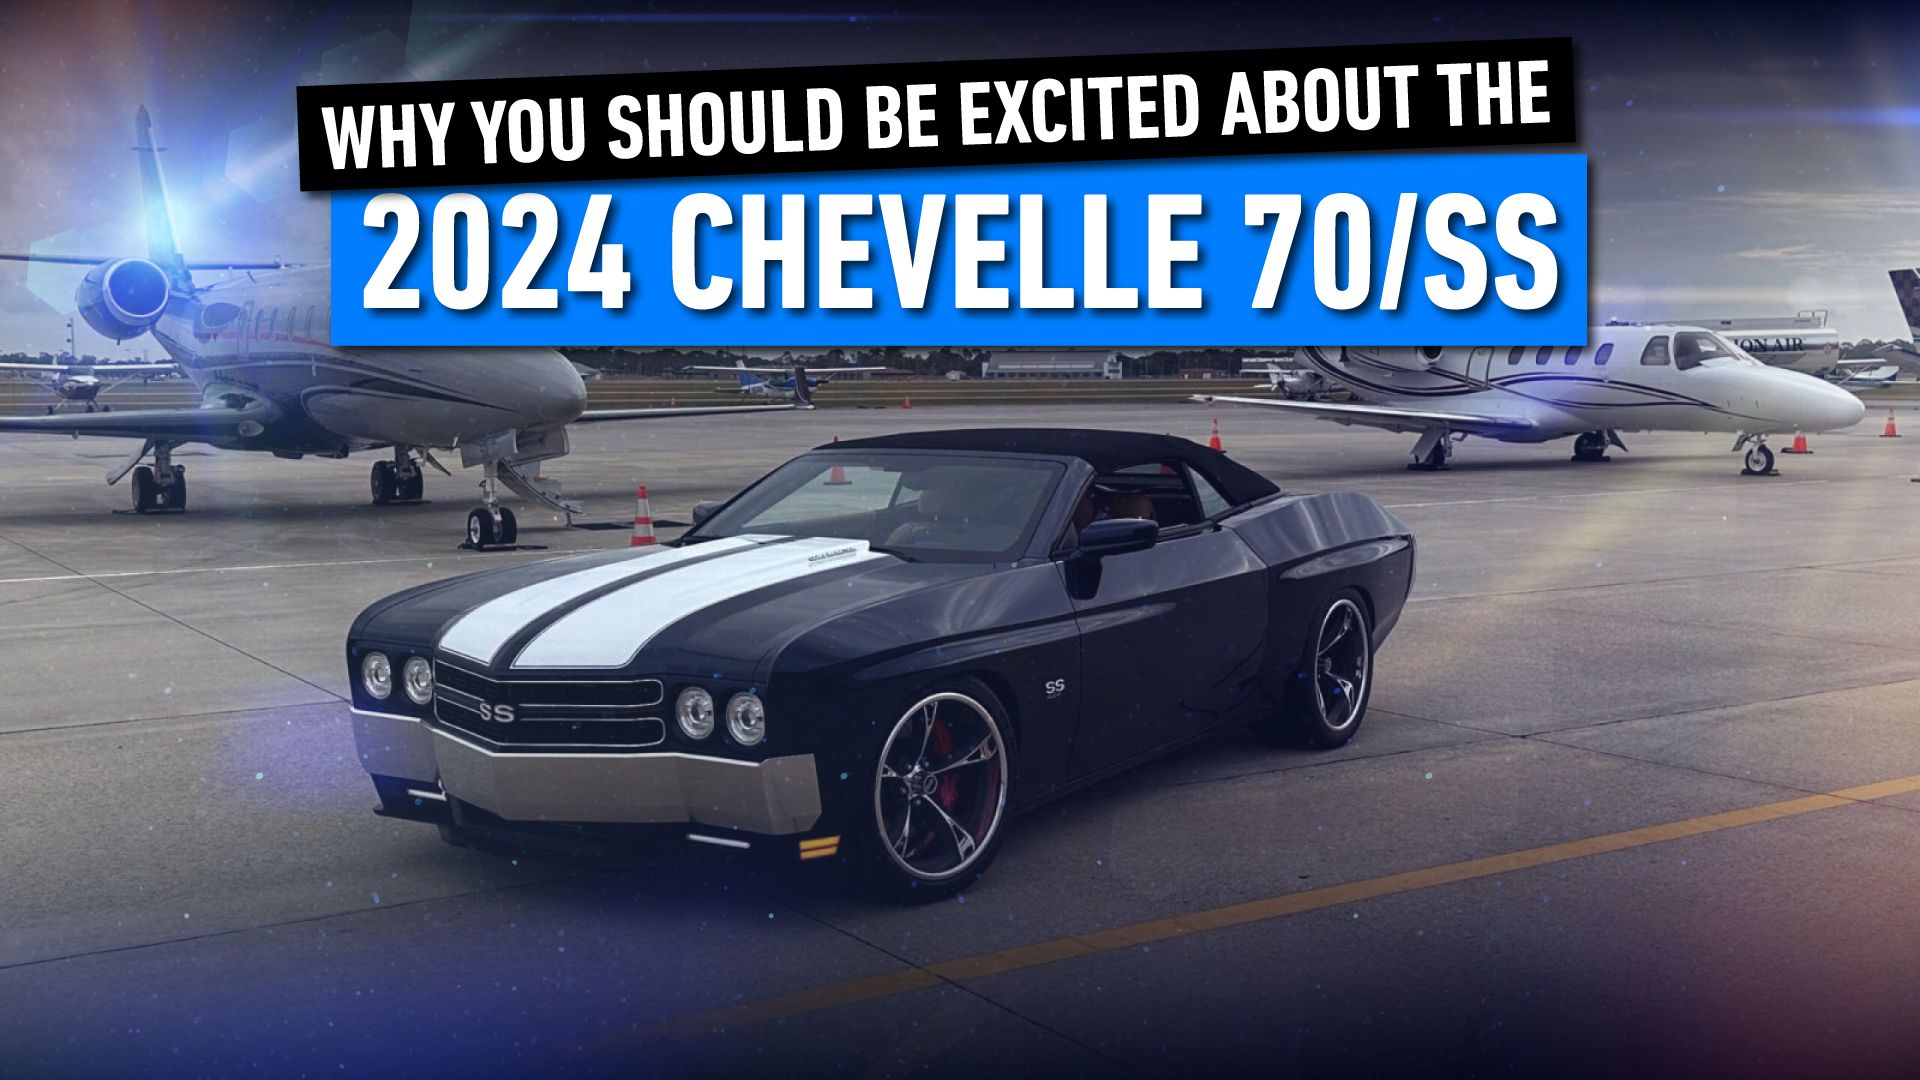 new 1500 hp 2024 chevelle 70/ss 454: super sport delivery documented